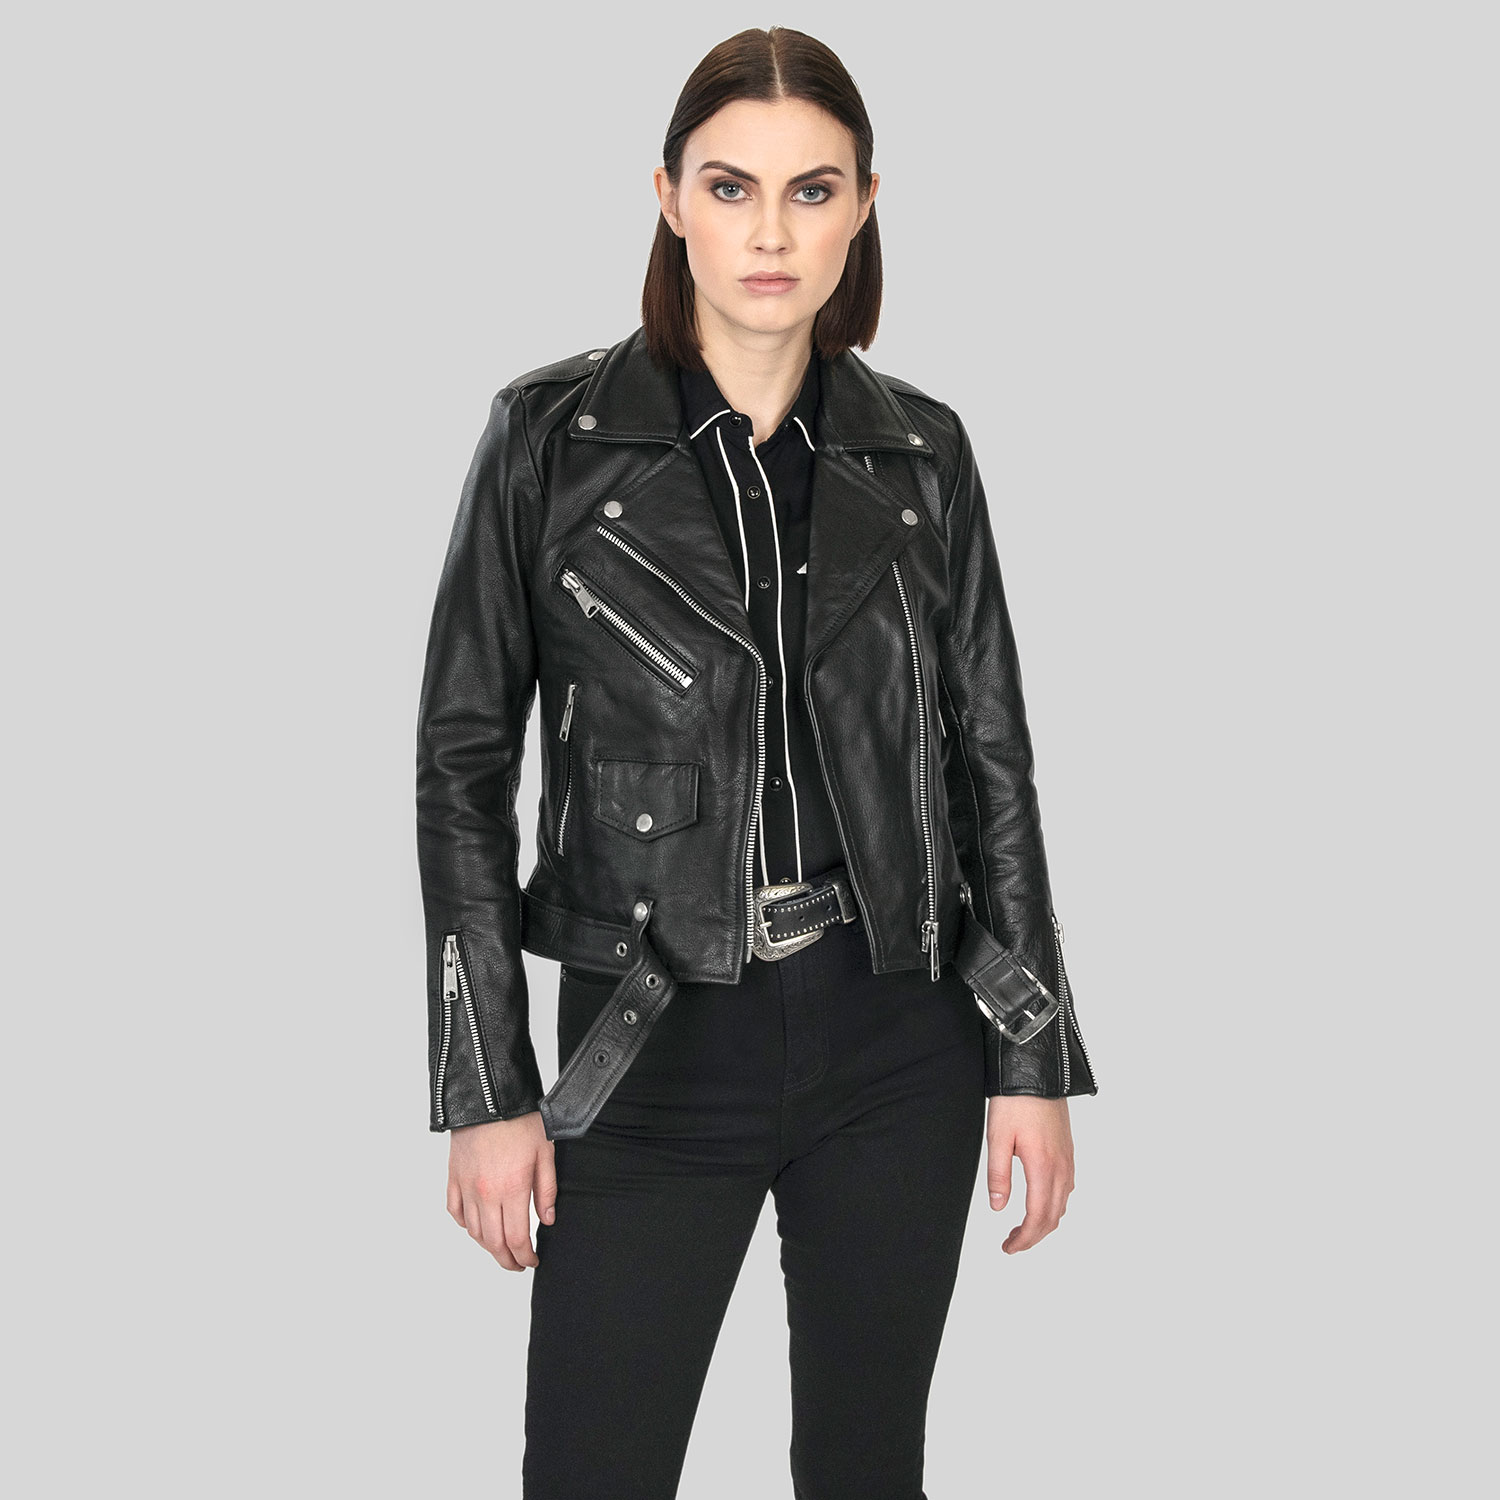 Commando and Black - Apparel Straight Hell Lining Nickel - | - To Black Leather Jacket